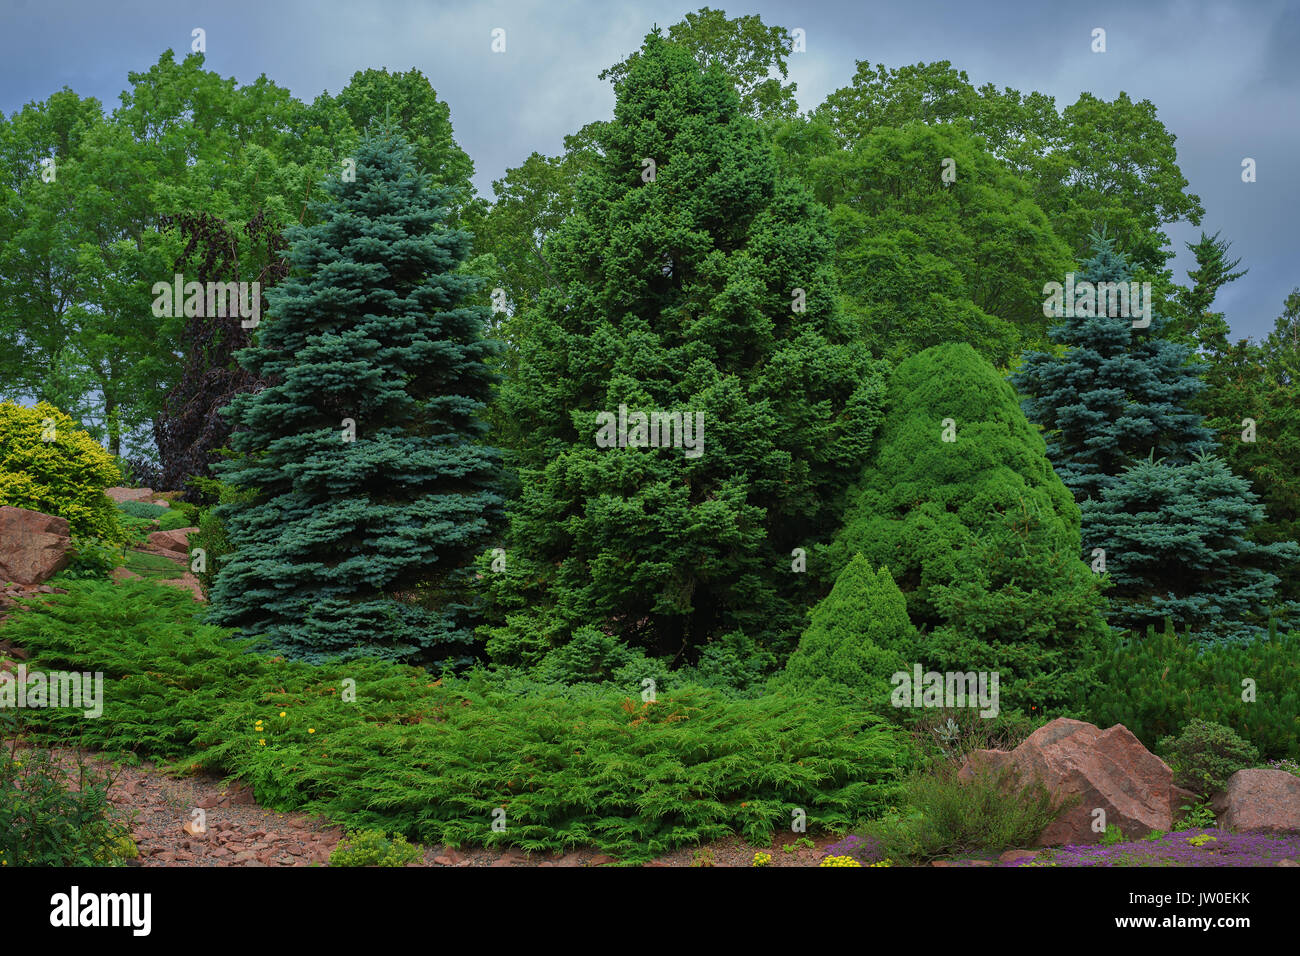 Collection of evergreen shrubbery. Stock Photo